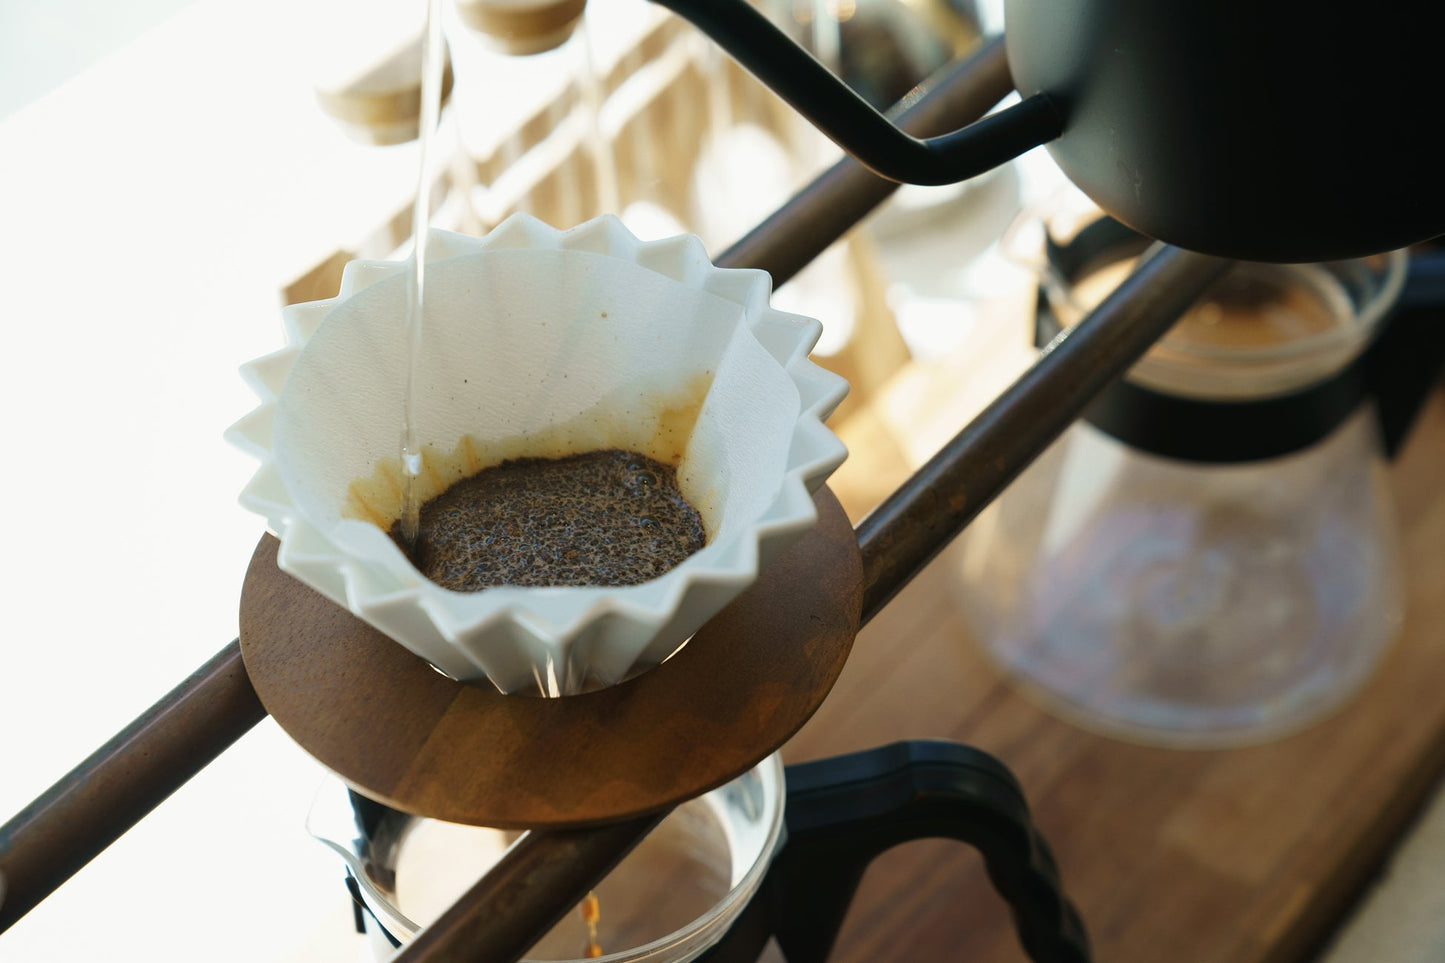 Coffee being made in a White ORIGAMI coffee dripper at a cafe in Japan